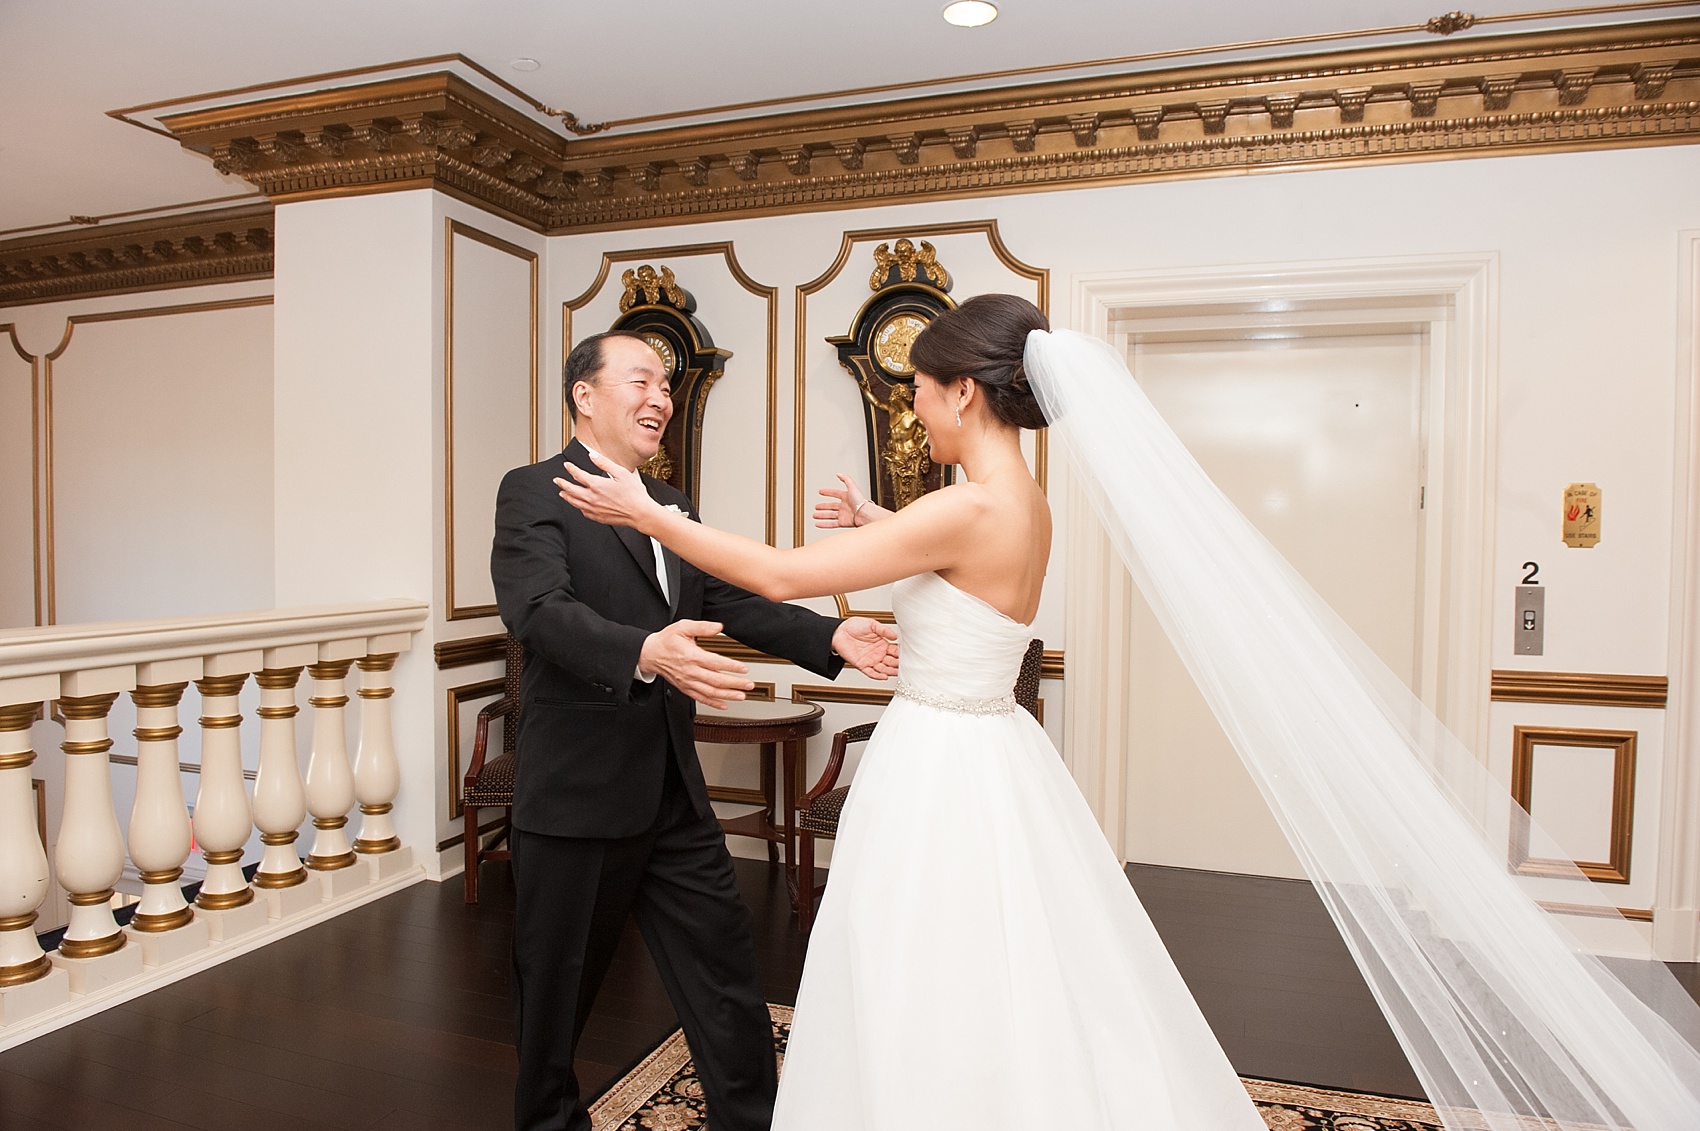 Father of the Bride moments. Images by Mikkel Paige Photographer. #fathersday #fatherofthebride